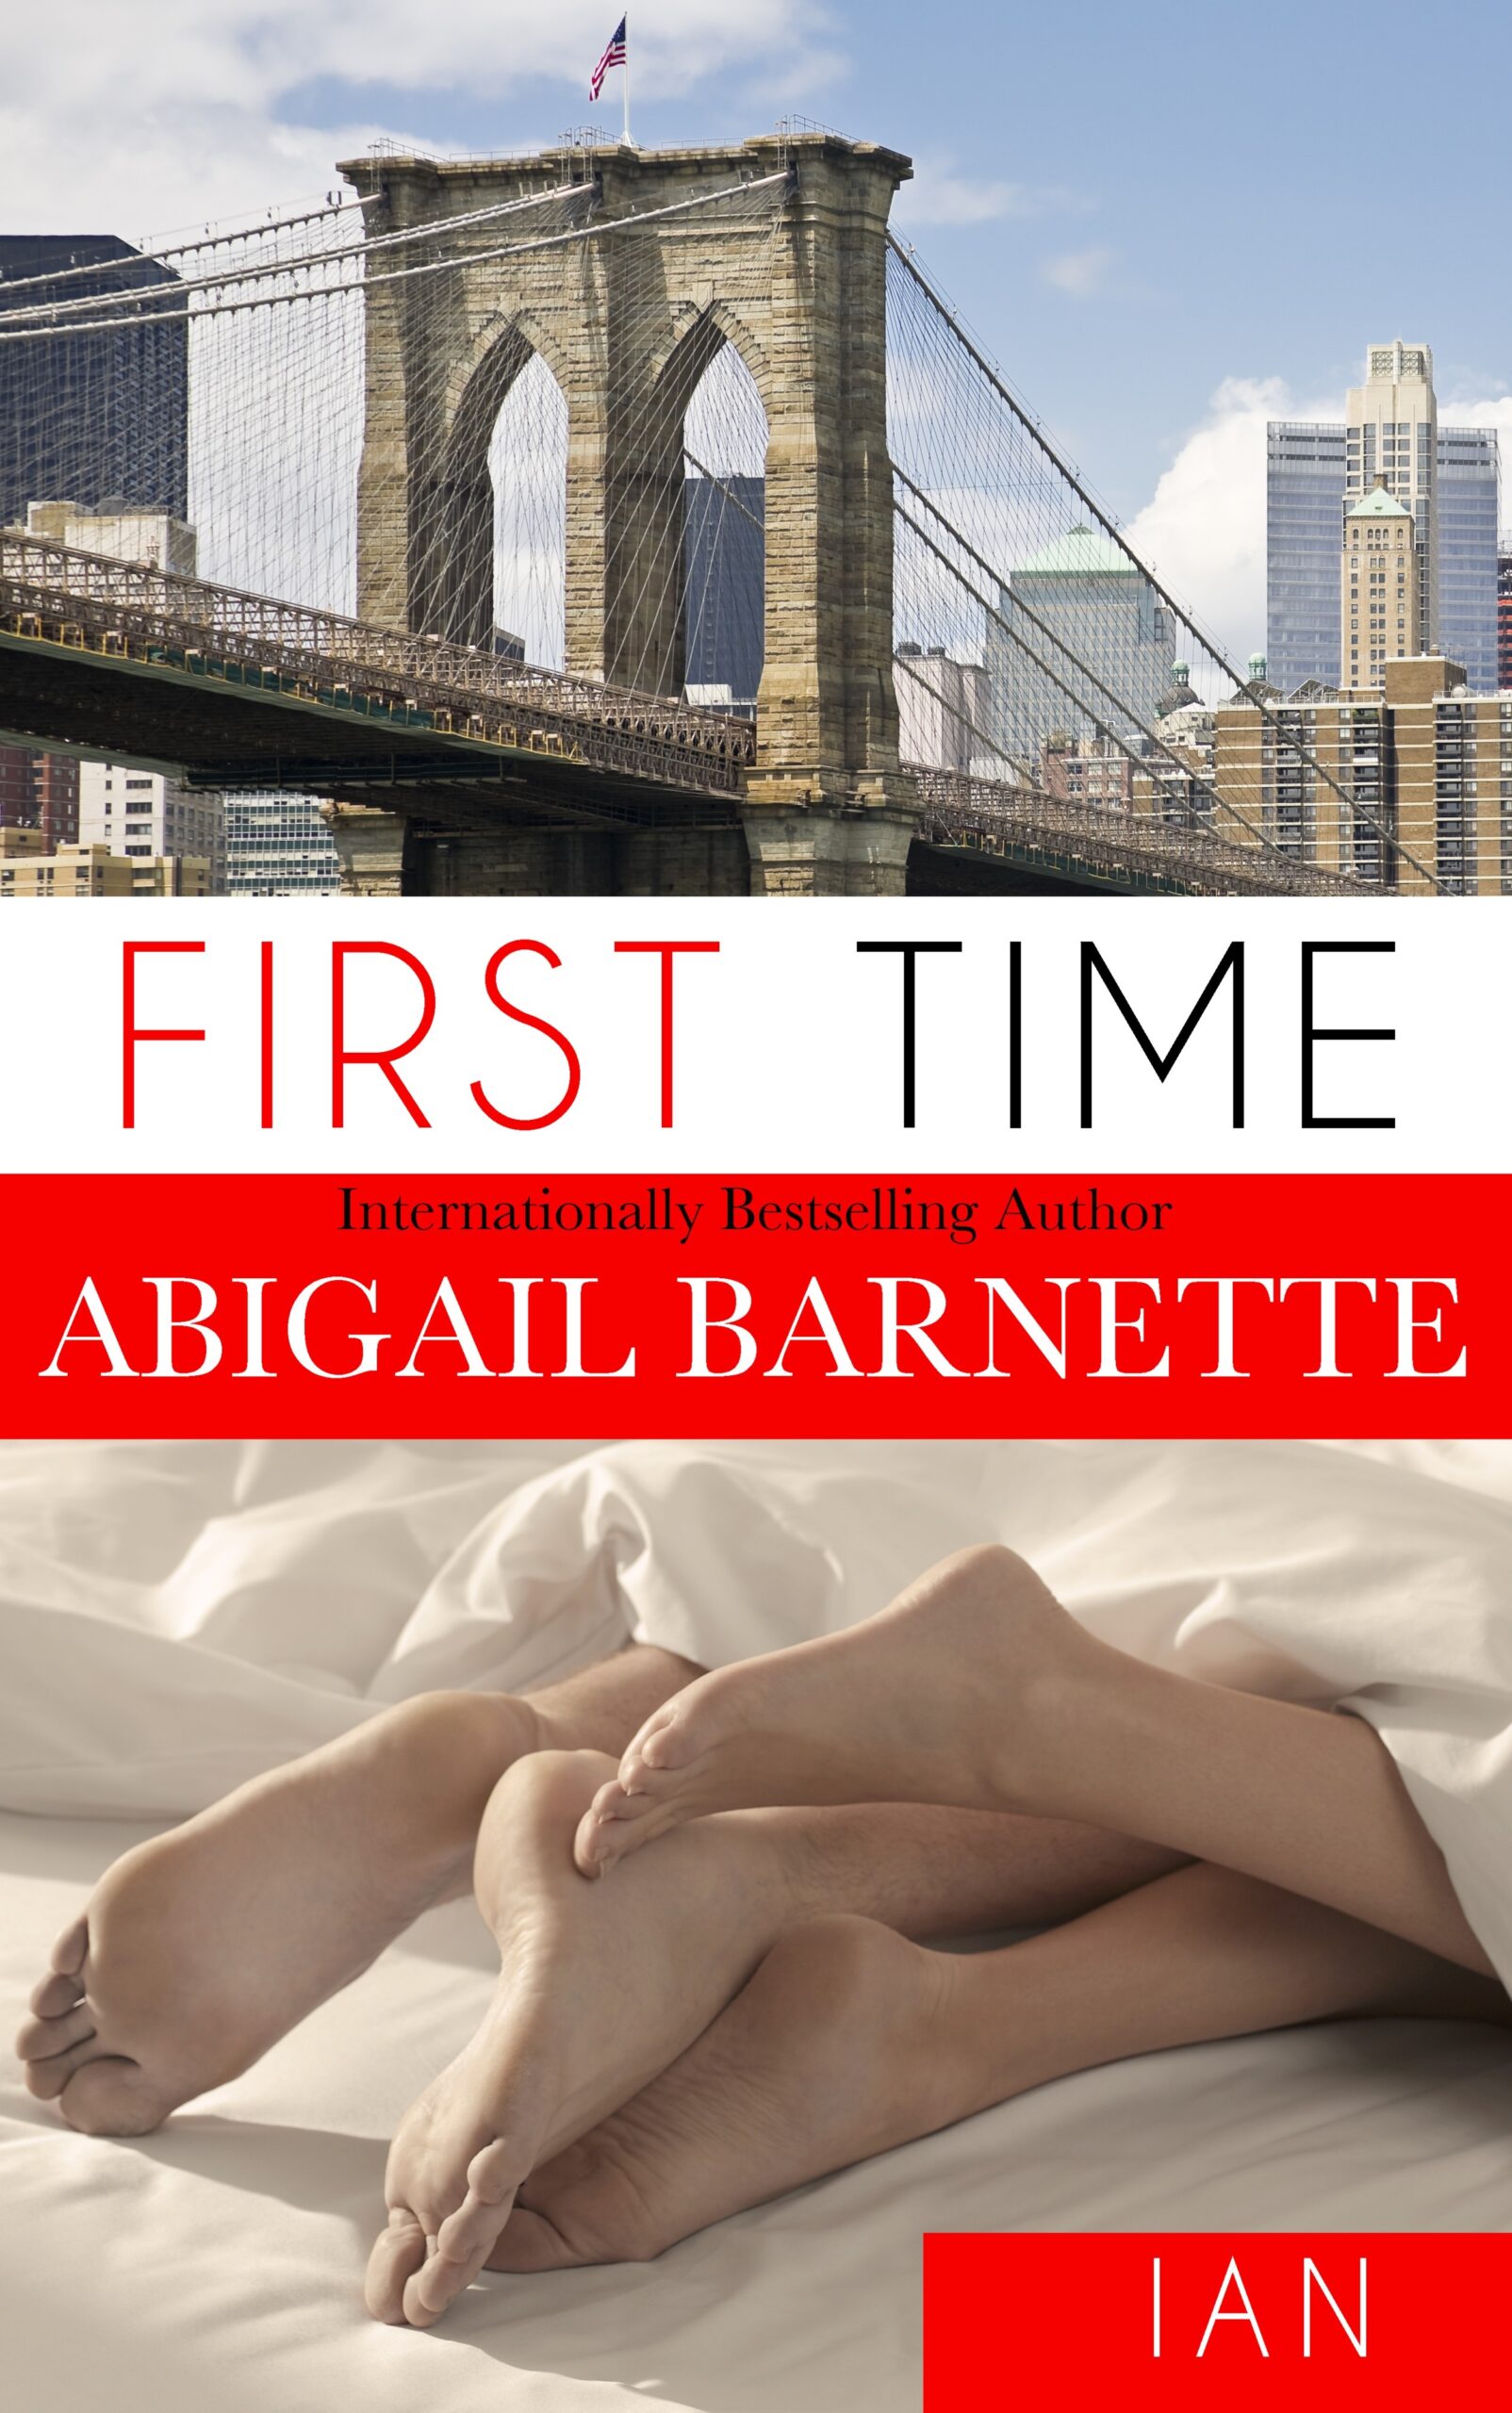 First Time_ Ian's Story (First - Abigail Barnette